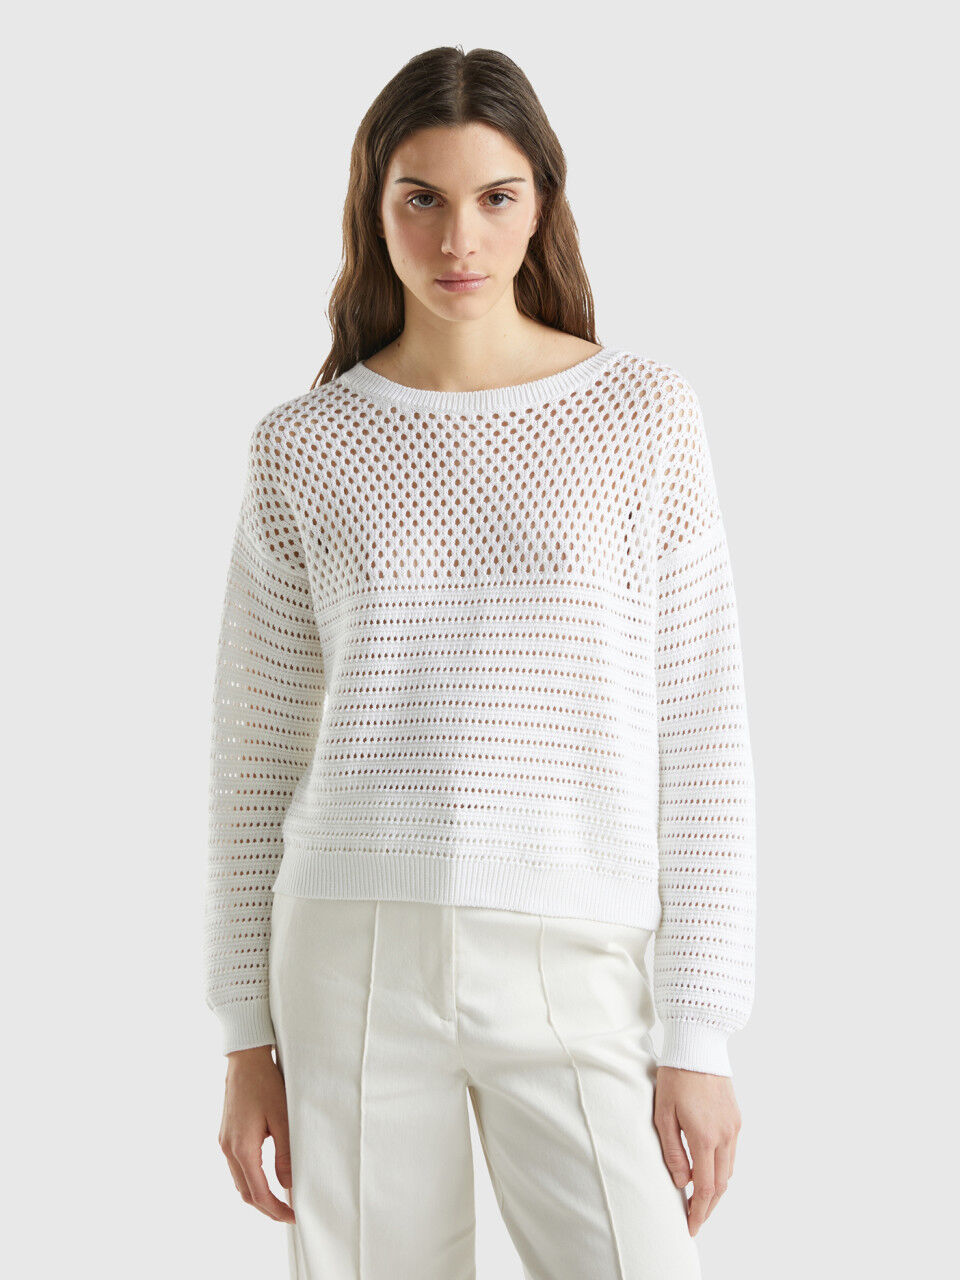 Women's Iconic Knitwear New Collection 2024 | Benetton